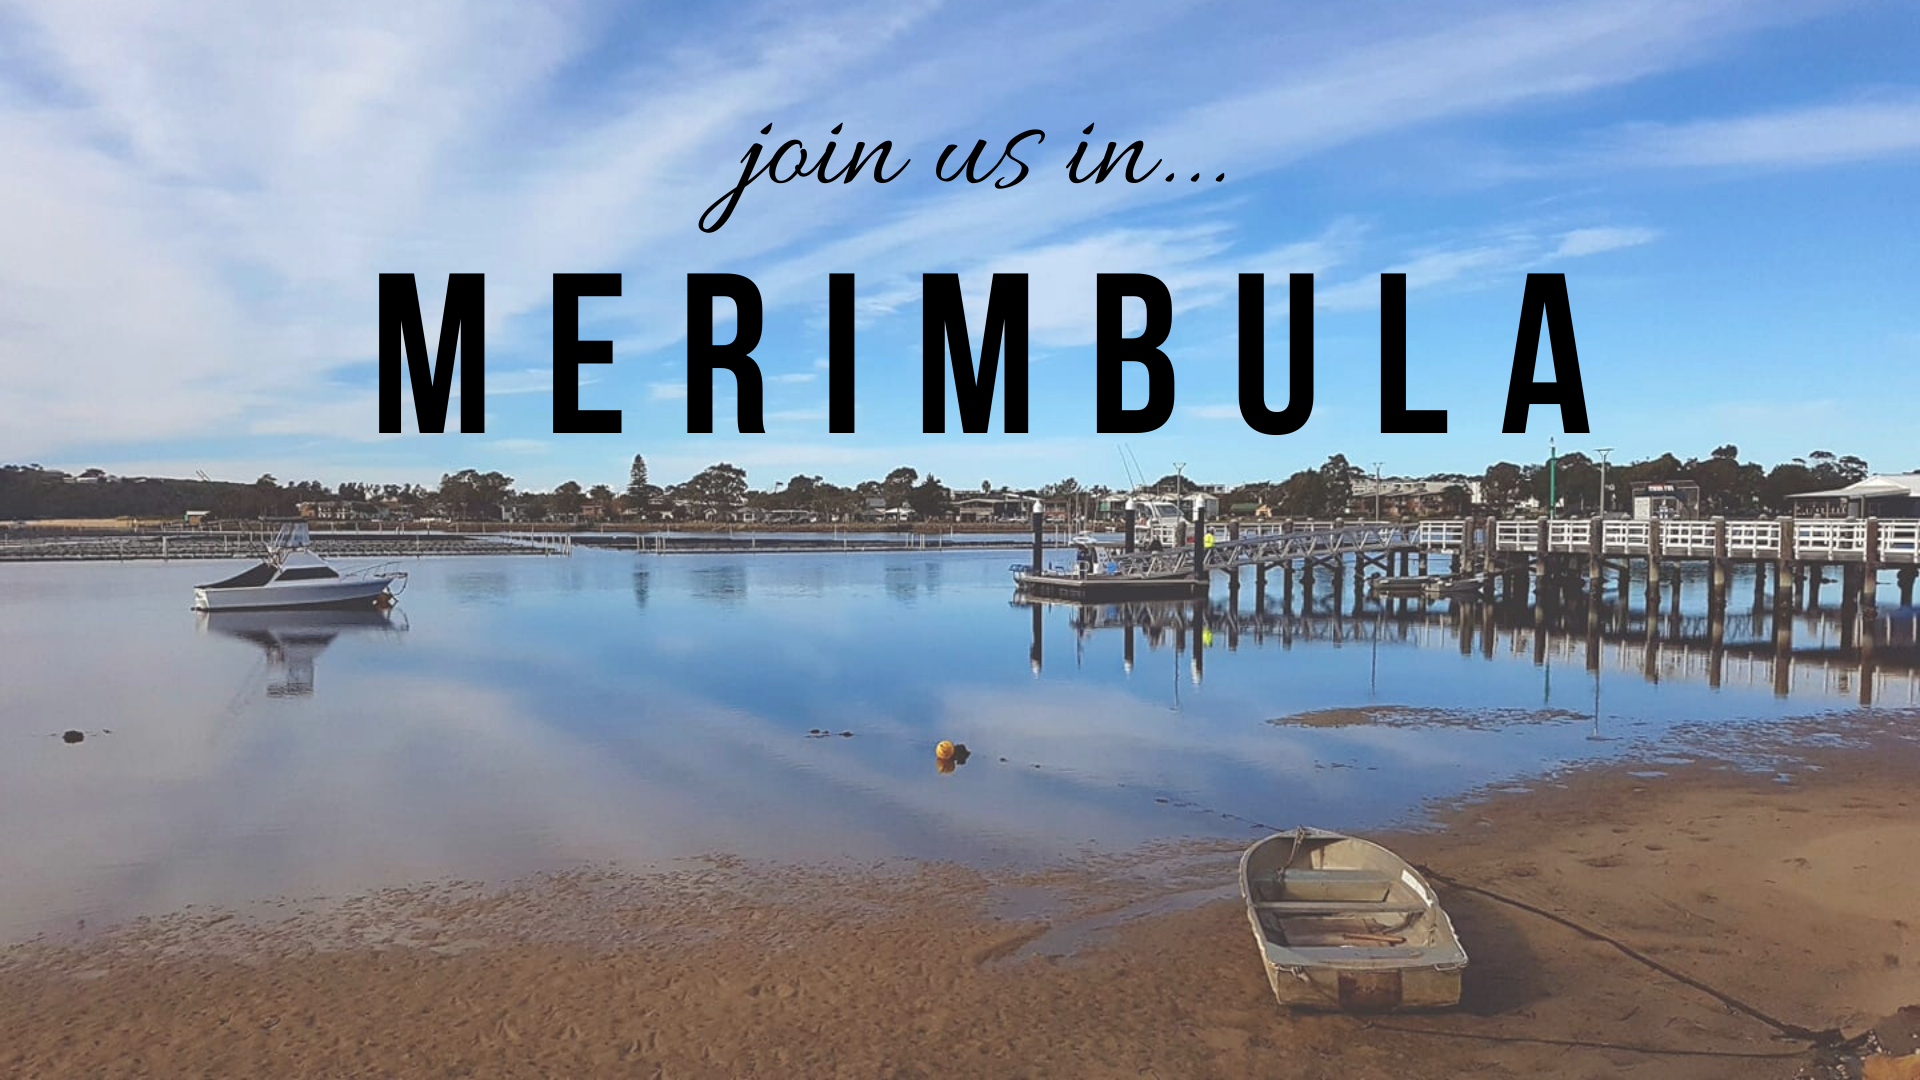 Merimbula - The very best place for your next Conference